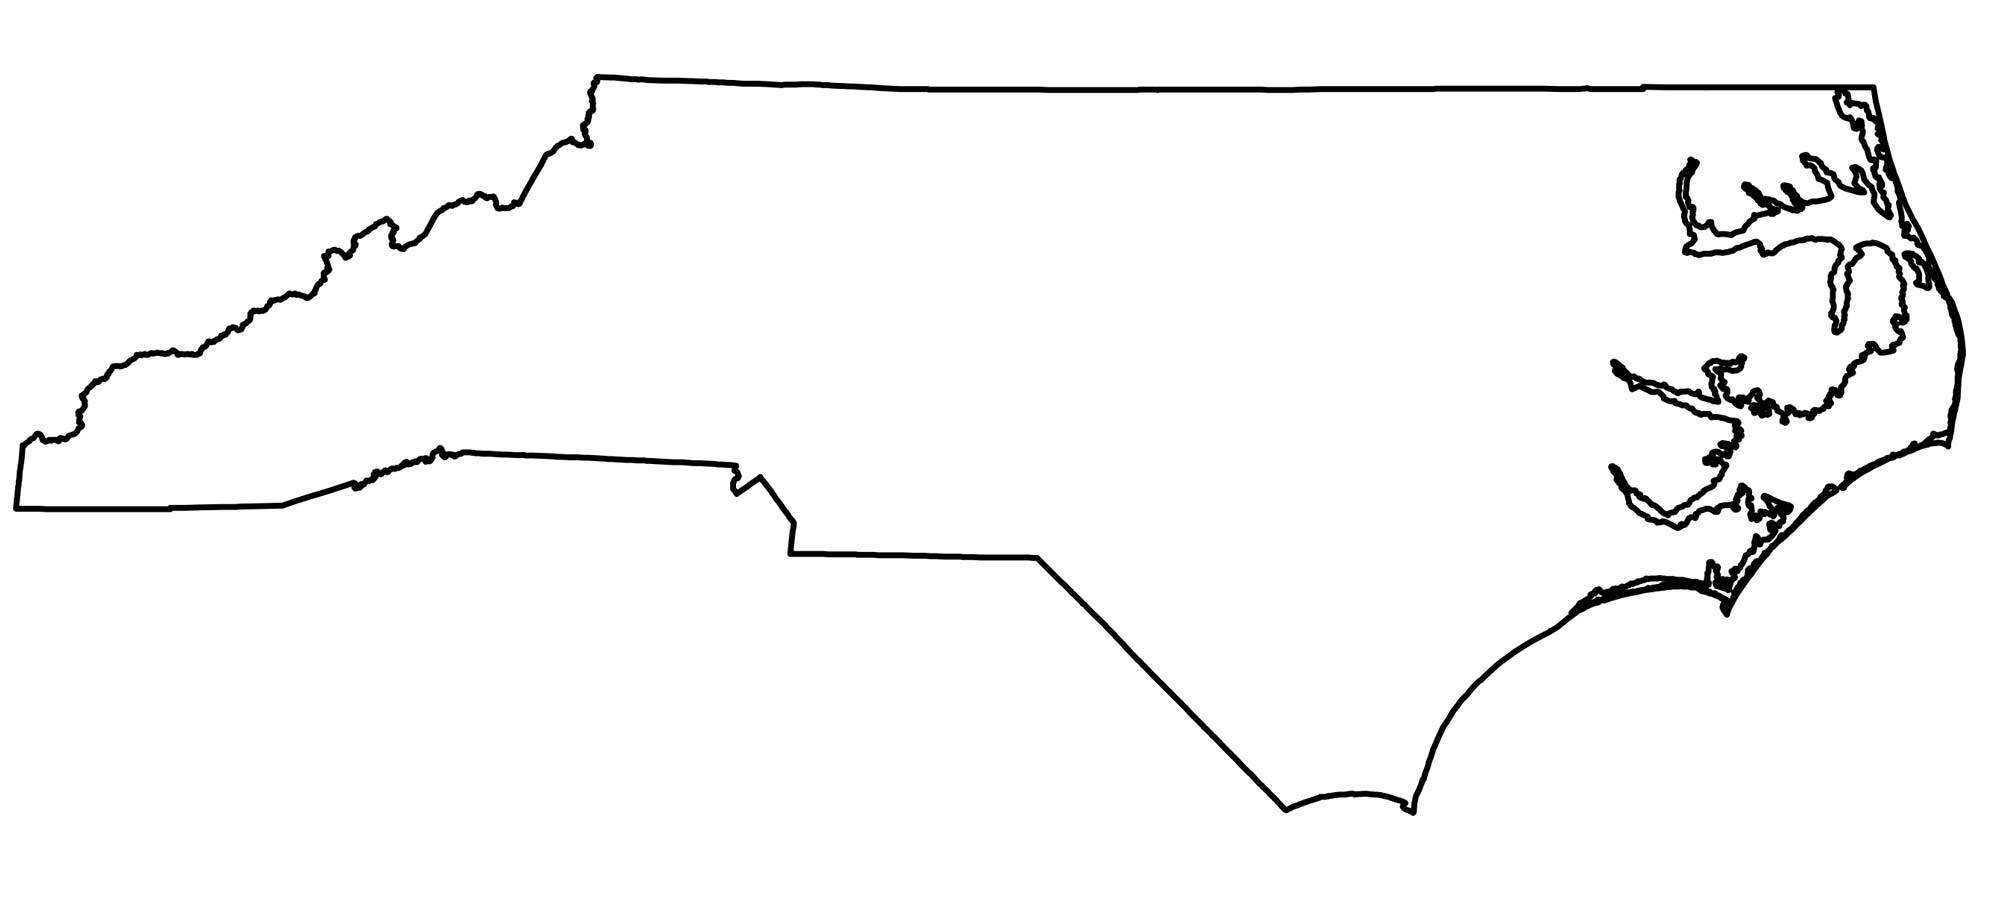 State Outlines Blank Maps of the 50 United States GIS Geography